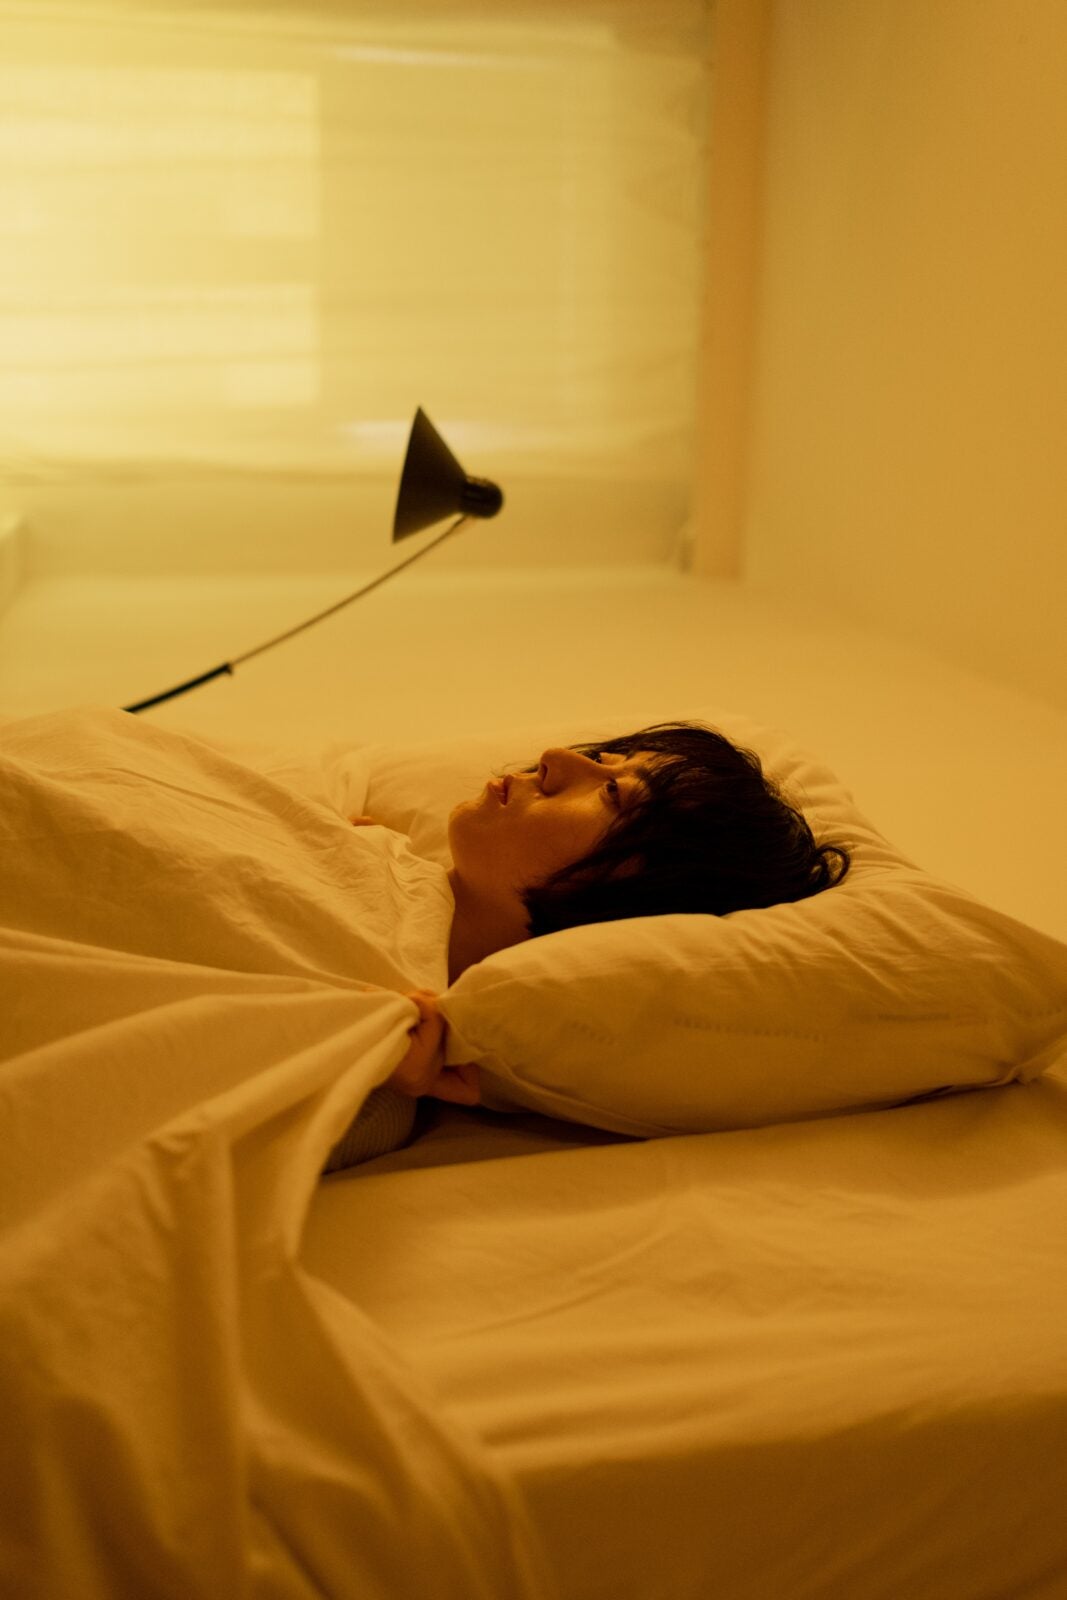 A young Asian woman with short hair laying on a bed.